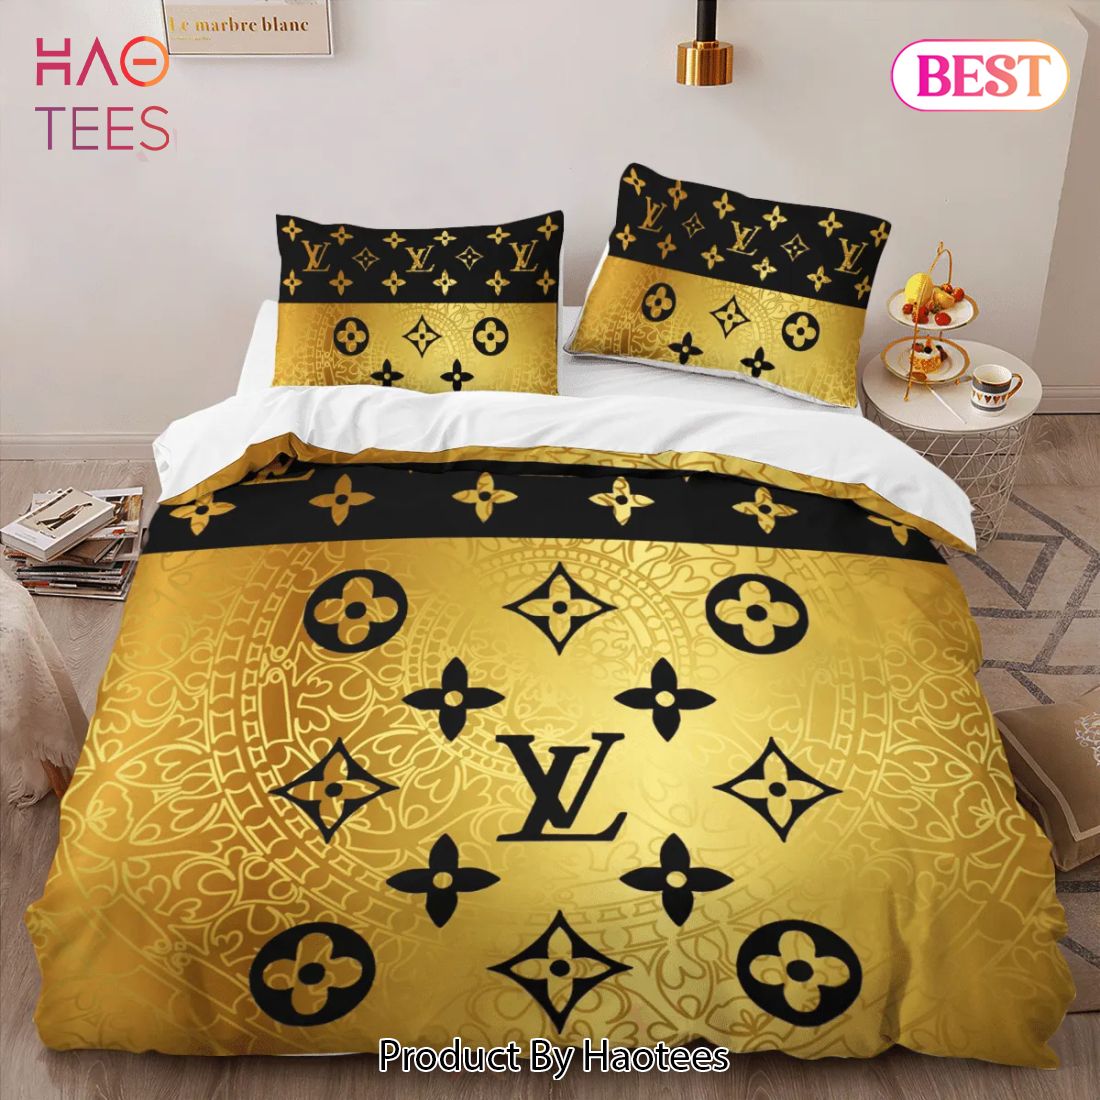 Louis Vuitton Bedding  Lux Decor and Spreads